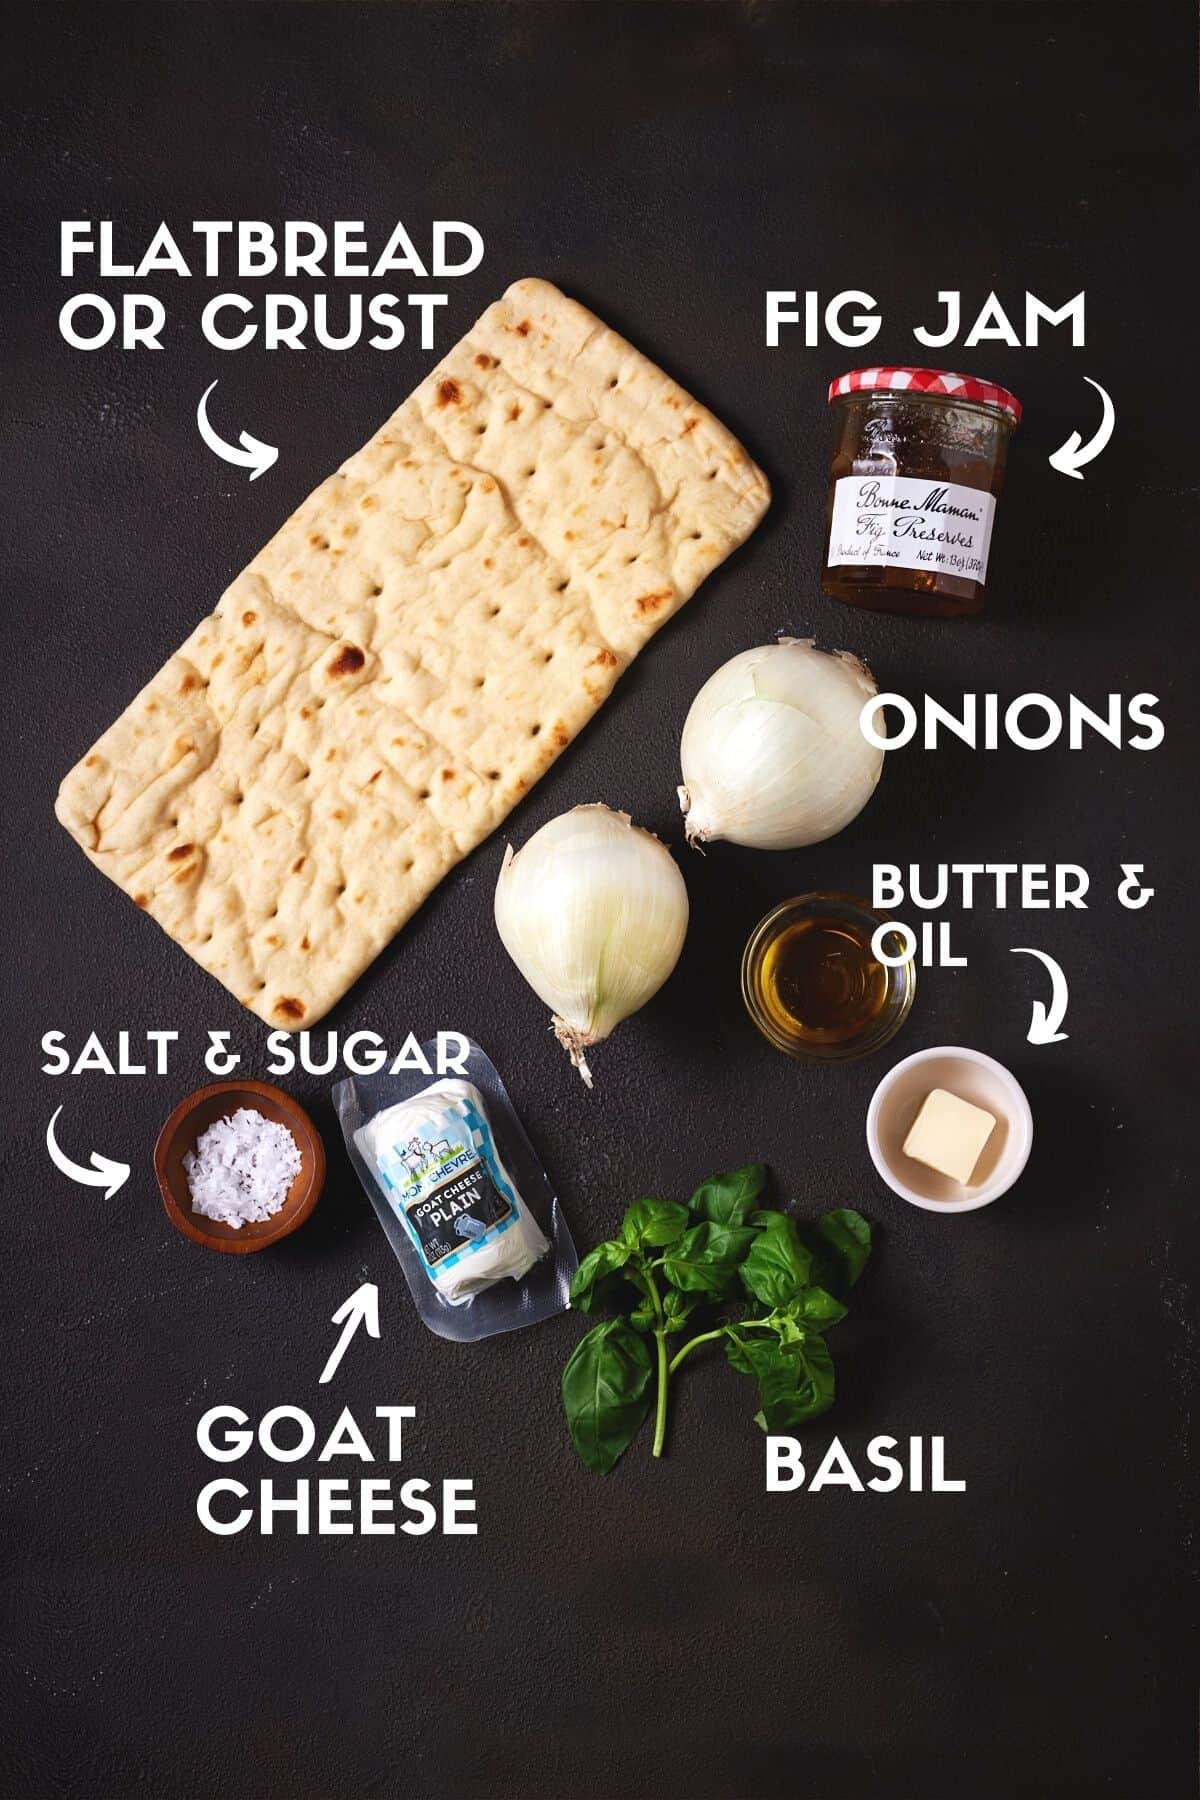 Ingredients for goat cheese pizza including goat cheese, flatbread, basil, onions & fig jam. 